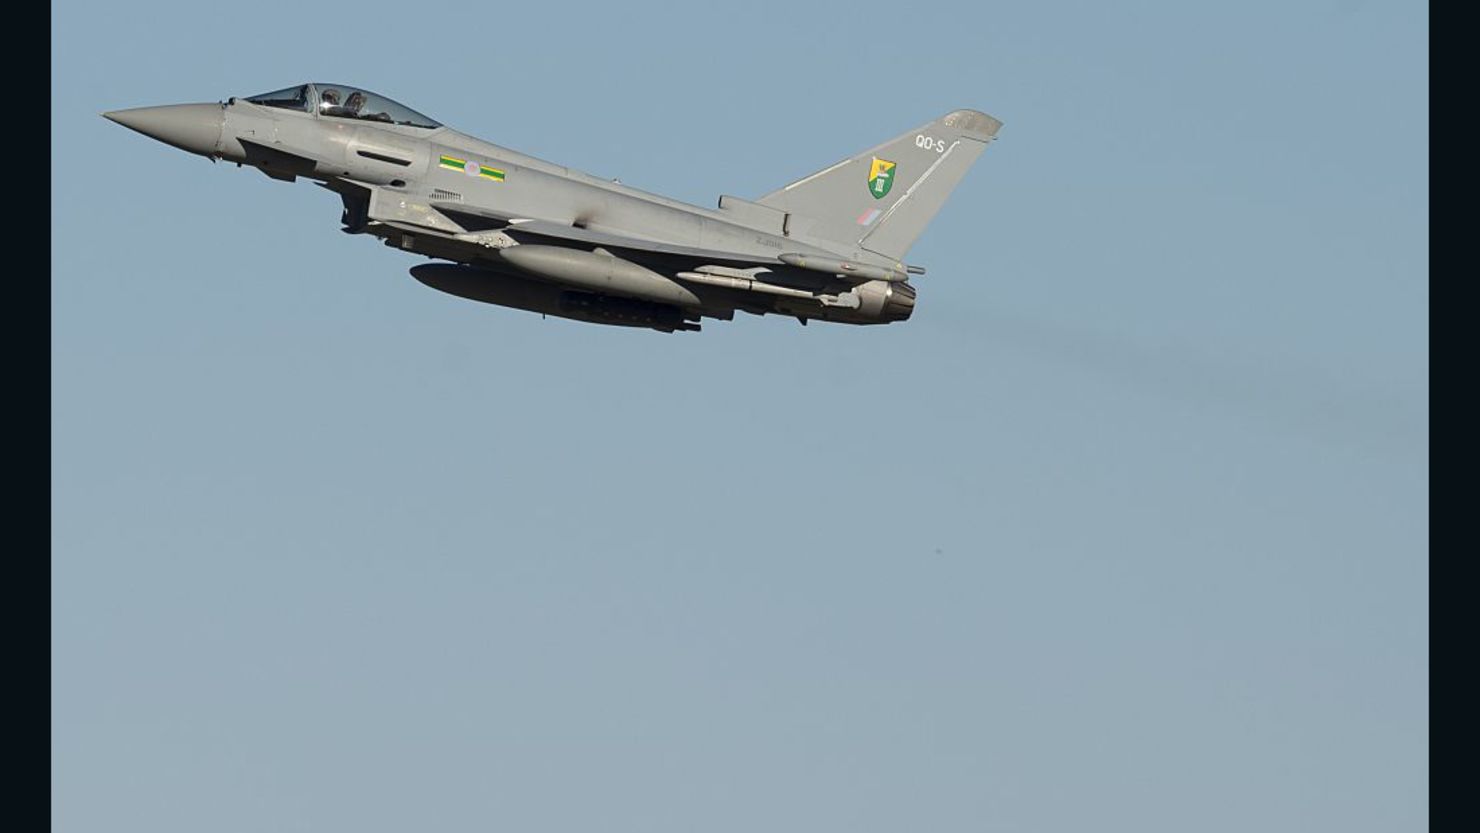 A Royal Air Force Typhoon -- the same type of fighter jet that carried out the strikes on the ISIS complex.